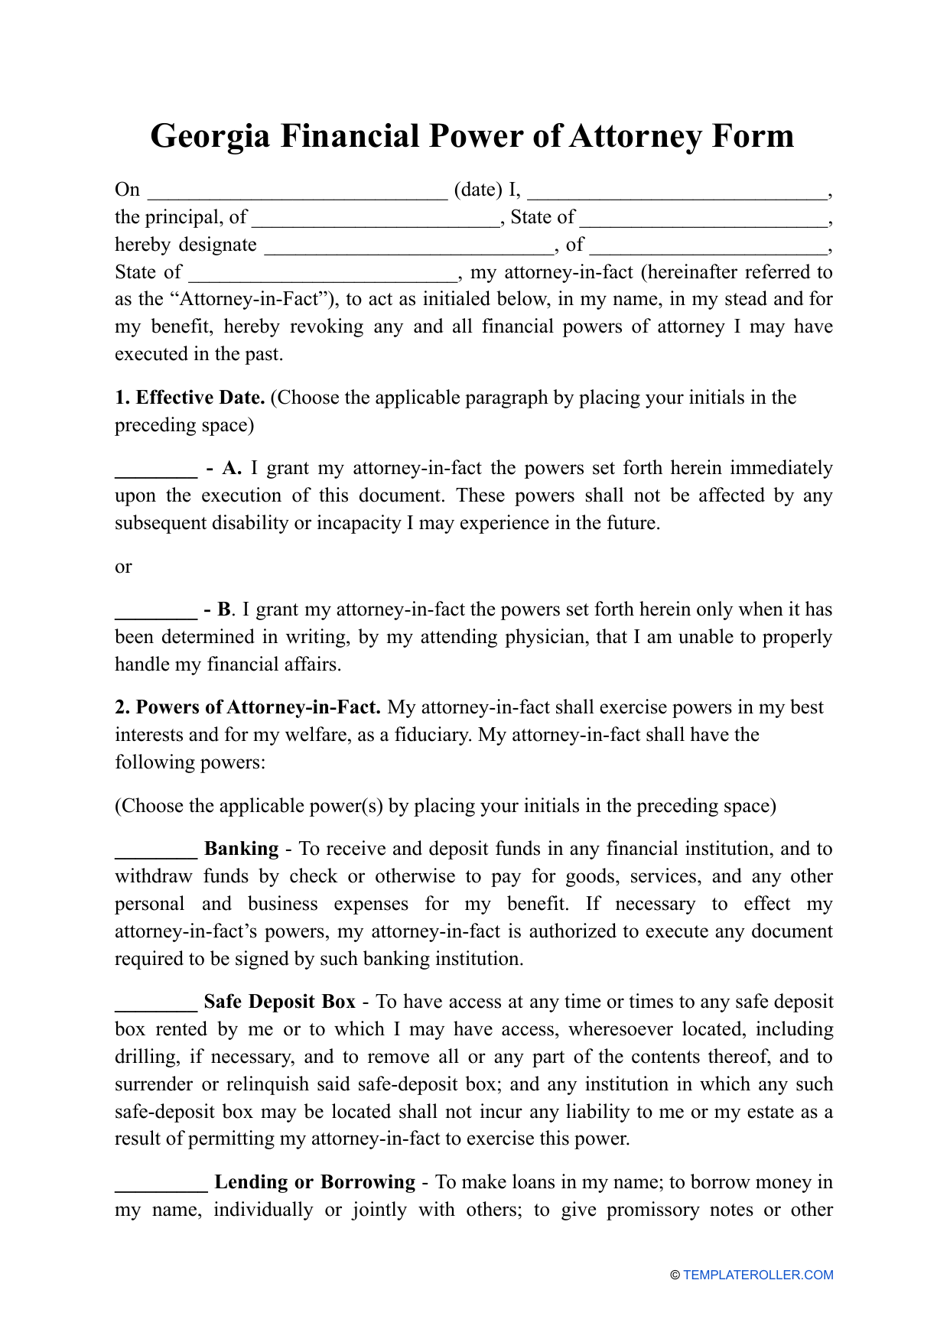 Financial Power of Attorney Form - Georgia (United States), Page 1